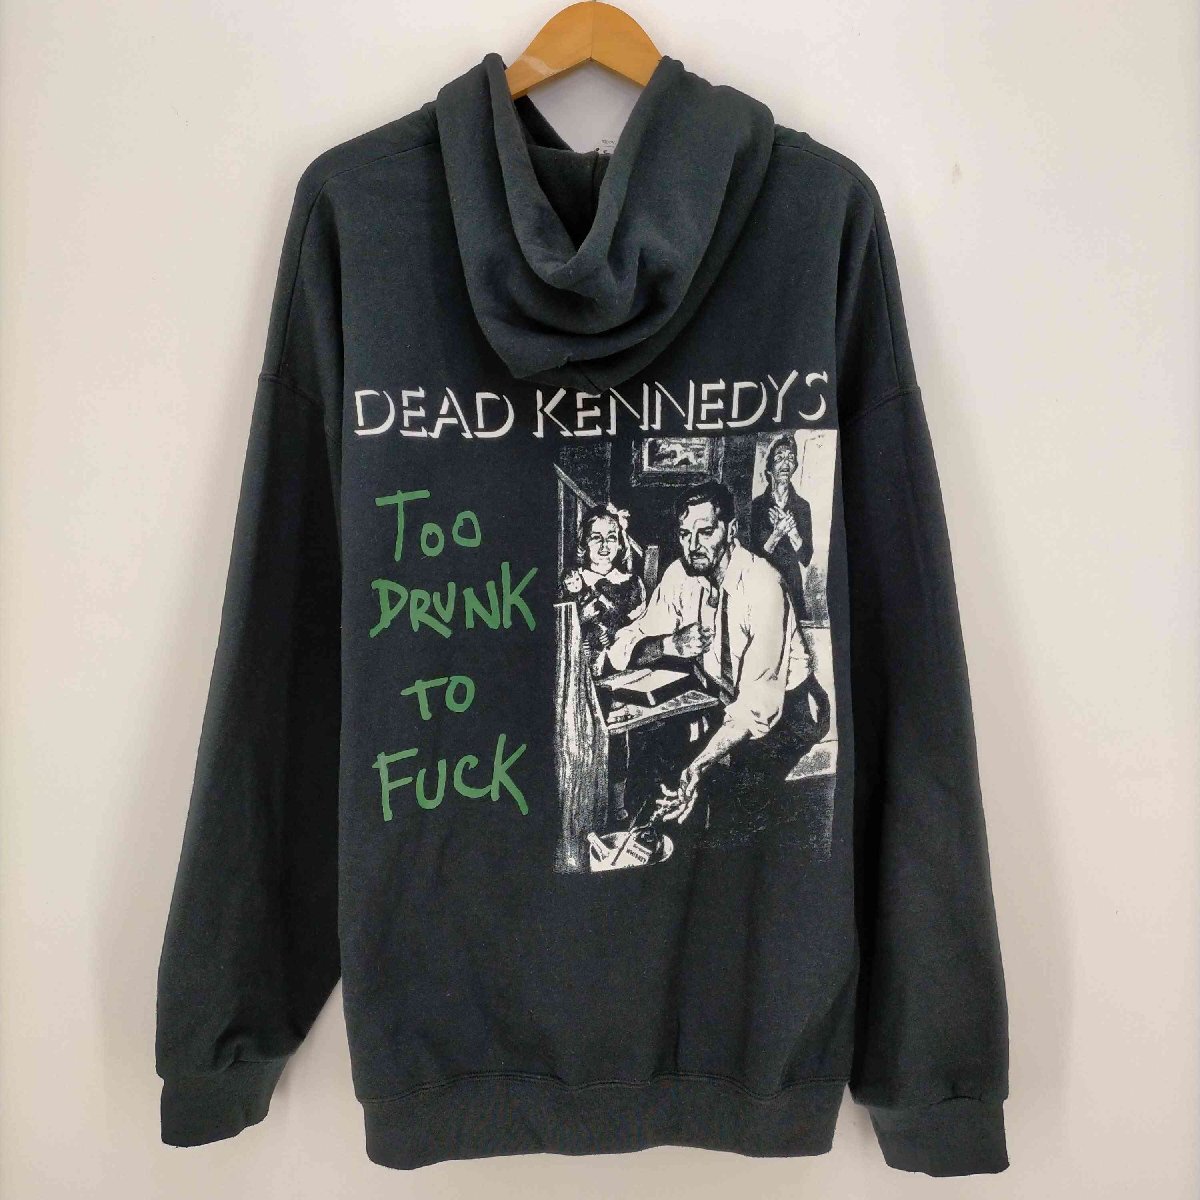 WACKO MARIA(ワコマリア) DEAD KENNEDYS PULLOVER HOODED SWE 中古 古着 0148_画像2